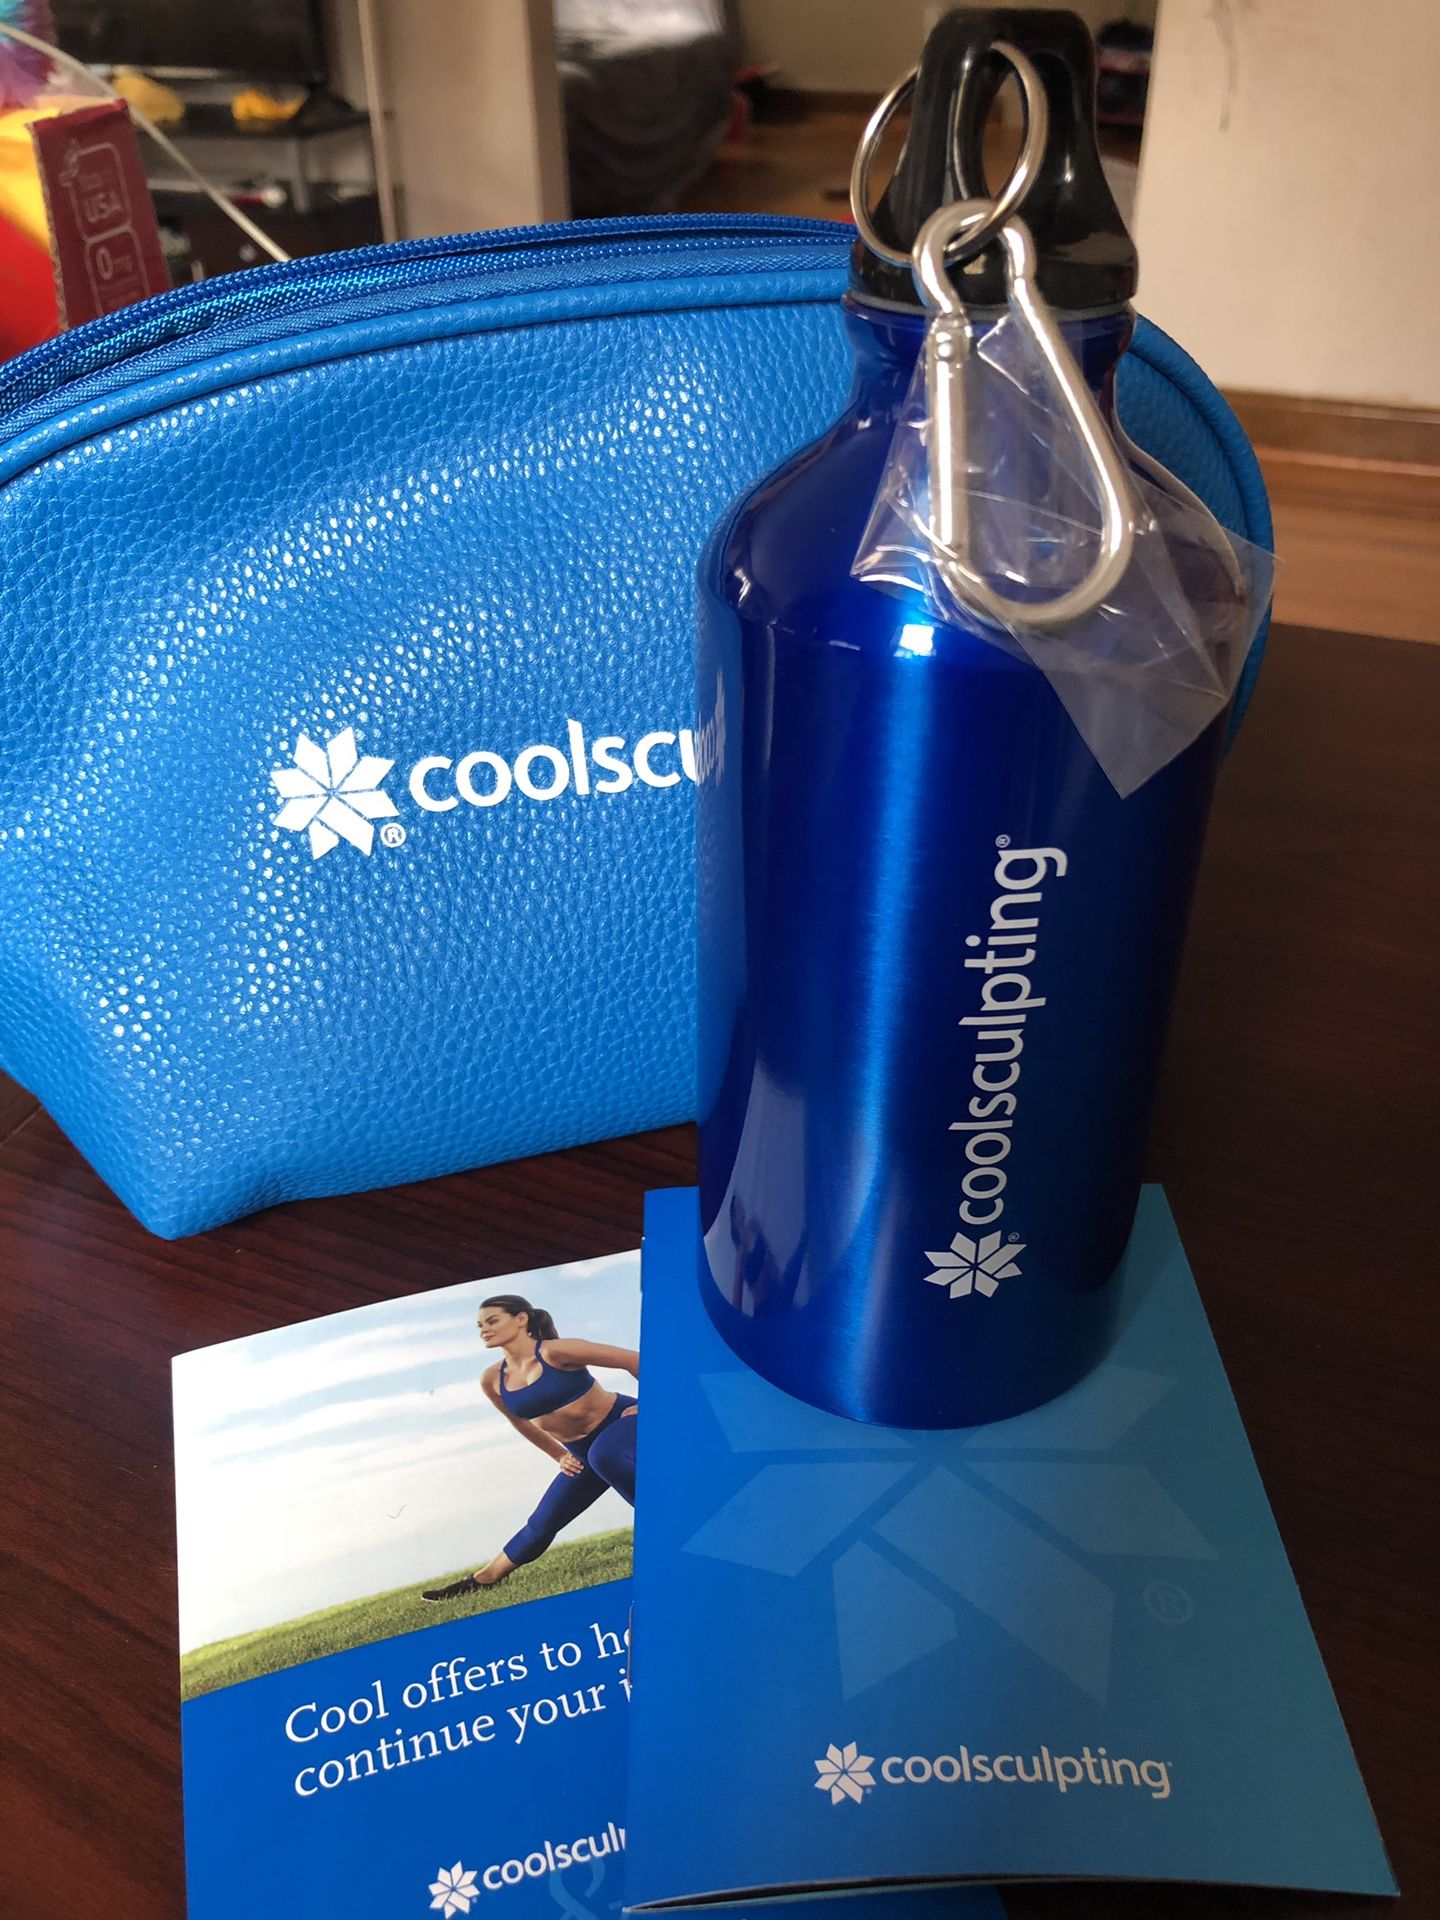 Water Bottle With Coolsculpting ad